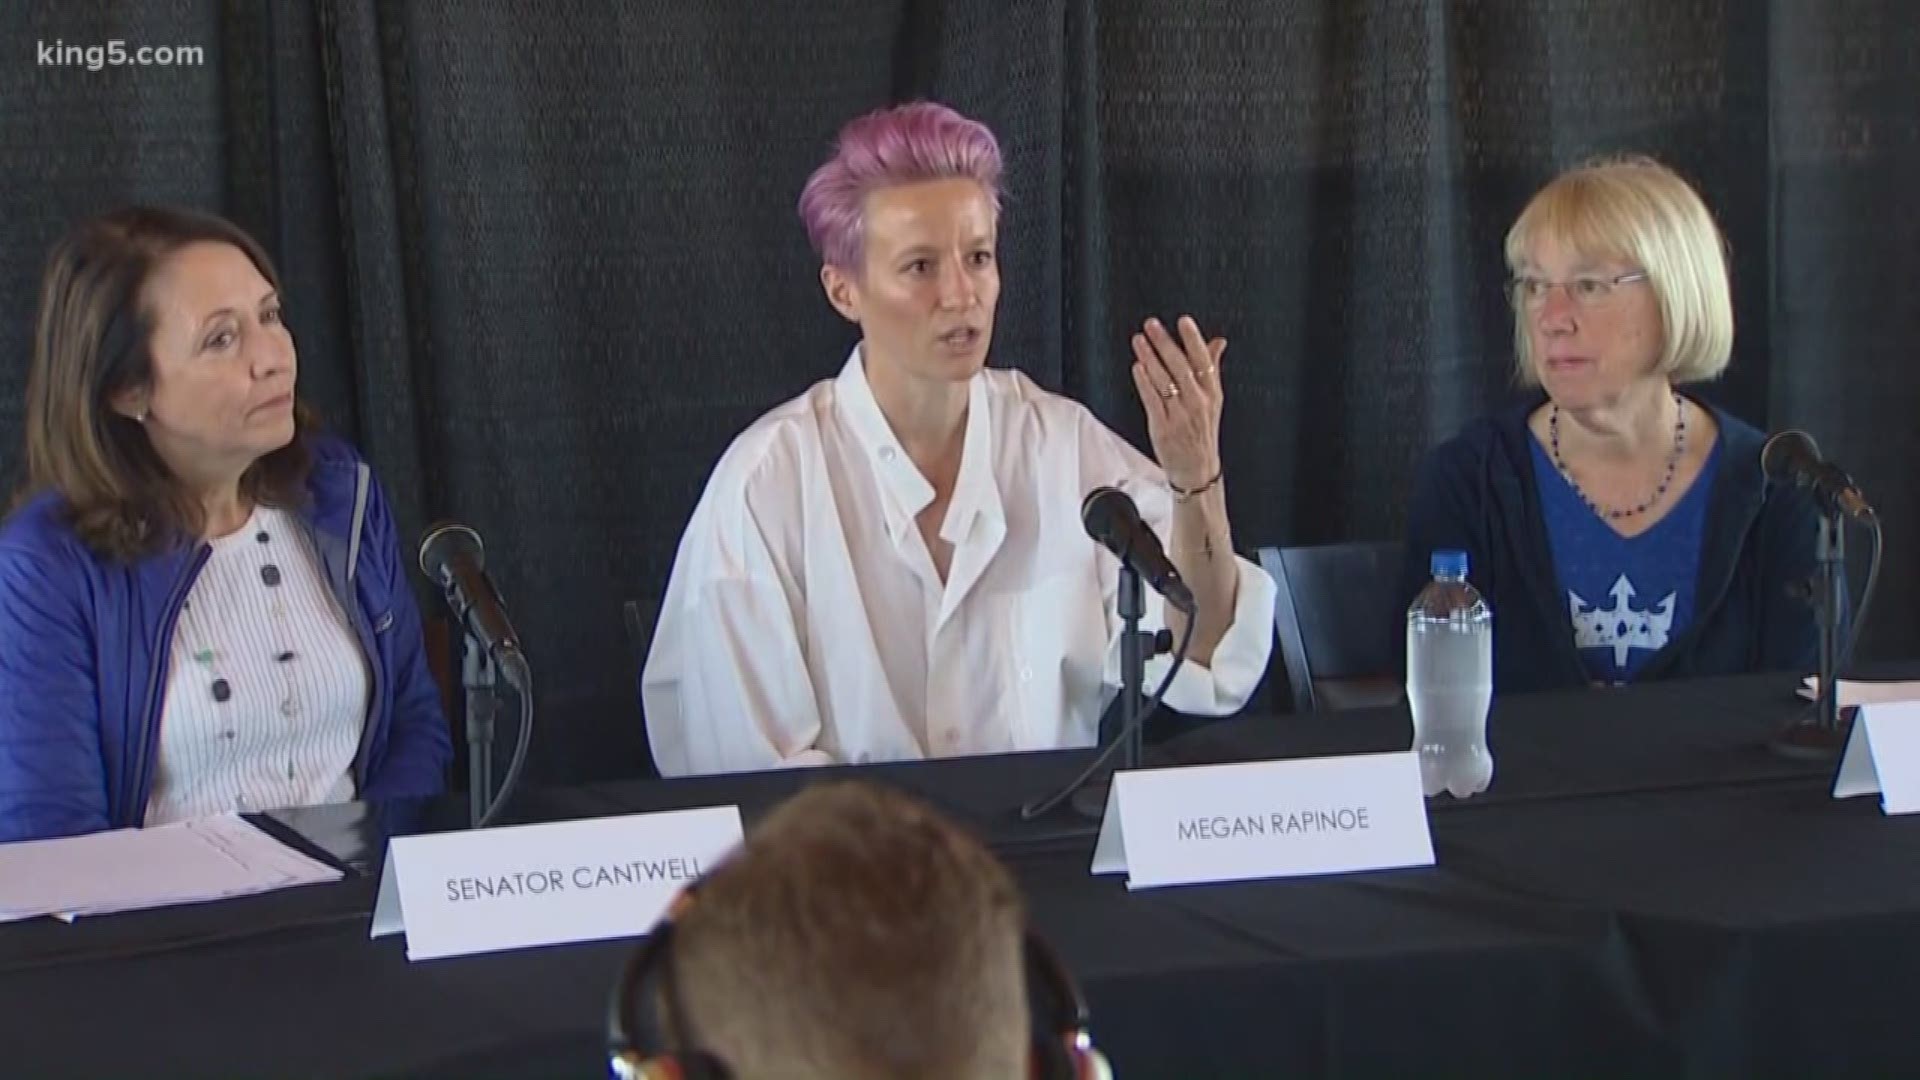 Soccer star Megan Rapinoe joined Senators Cantwell and Murray to advocate for equal pay. Tacoma Mayor Victoria Woodards declared July 28 as Equal Wages for Women Day. KING 5's Kalie Greenberg reports.